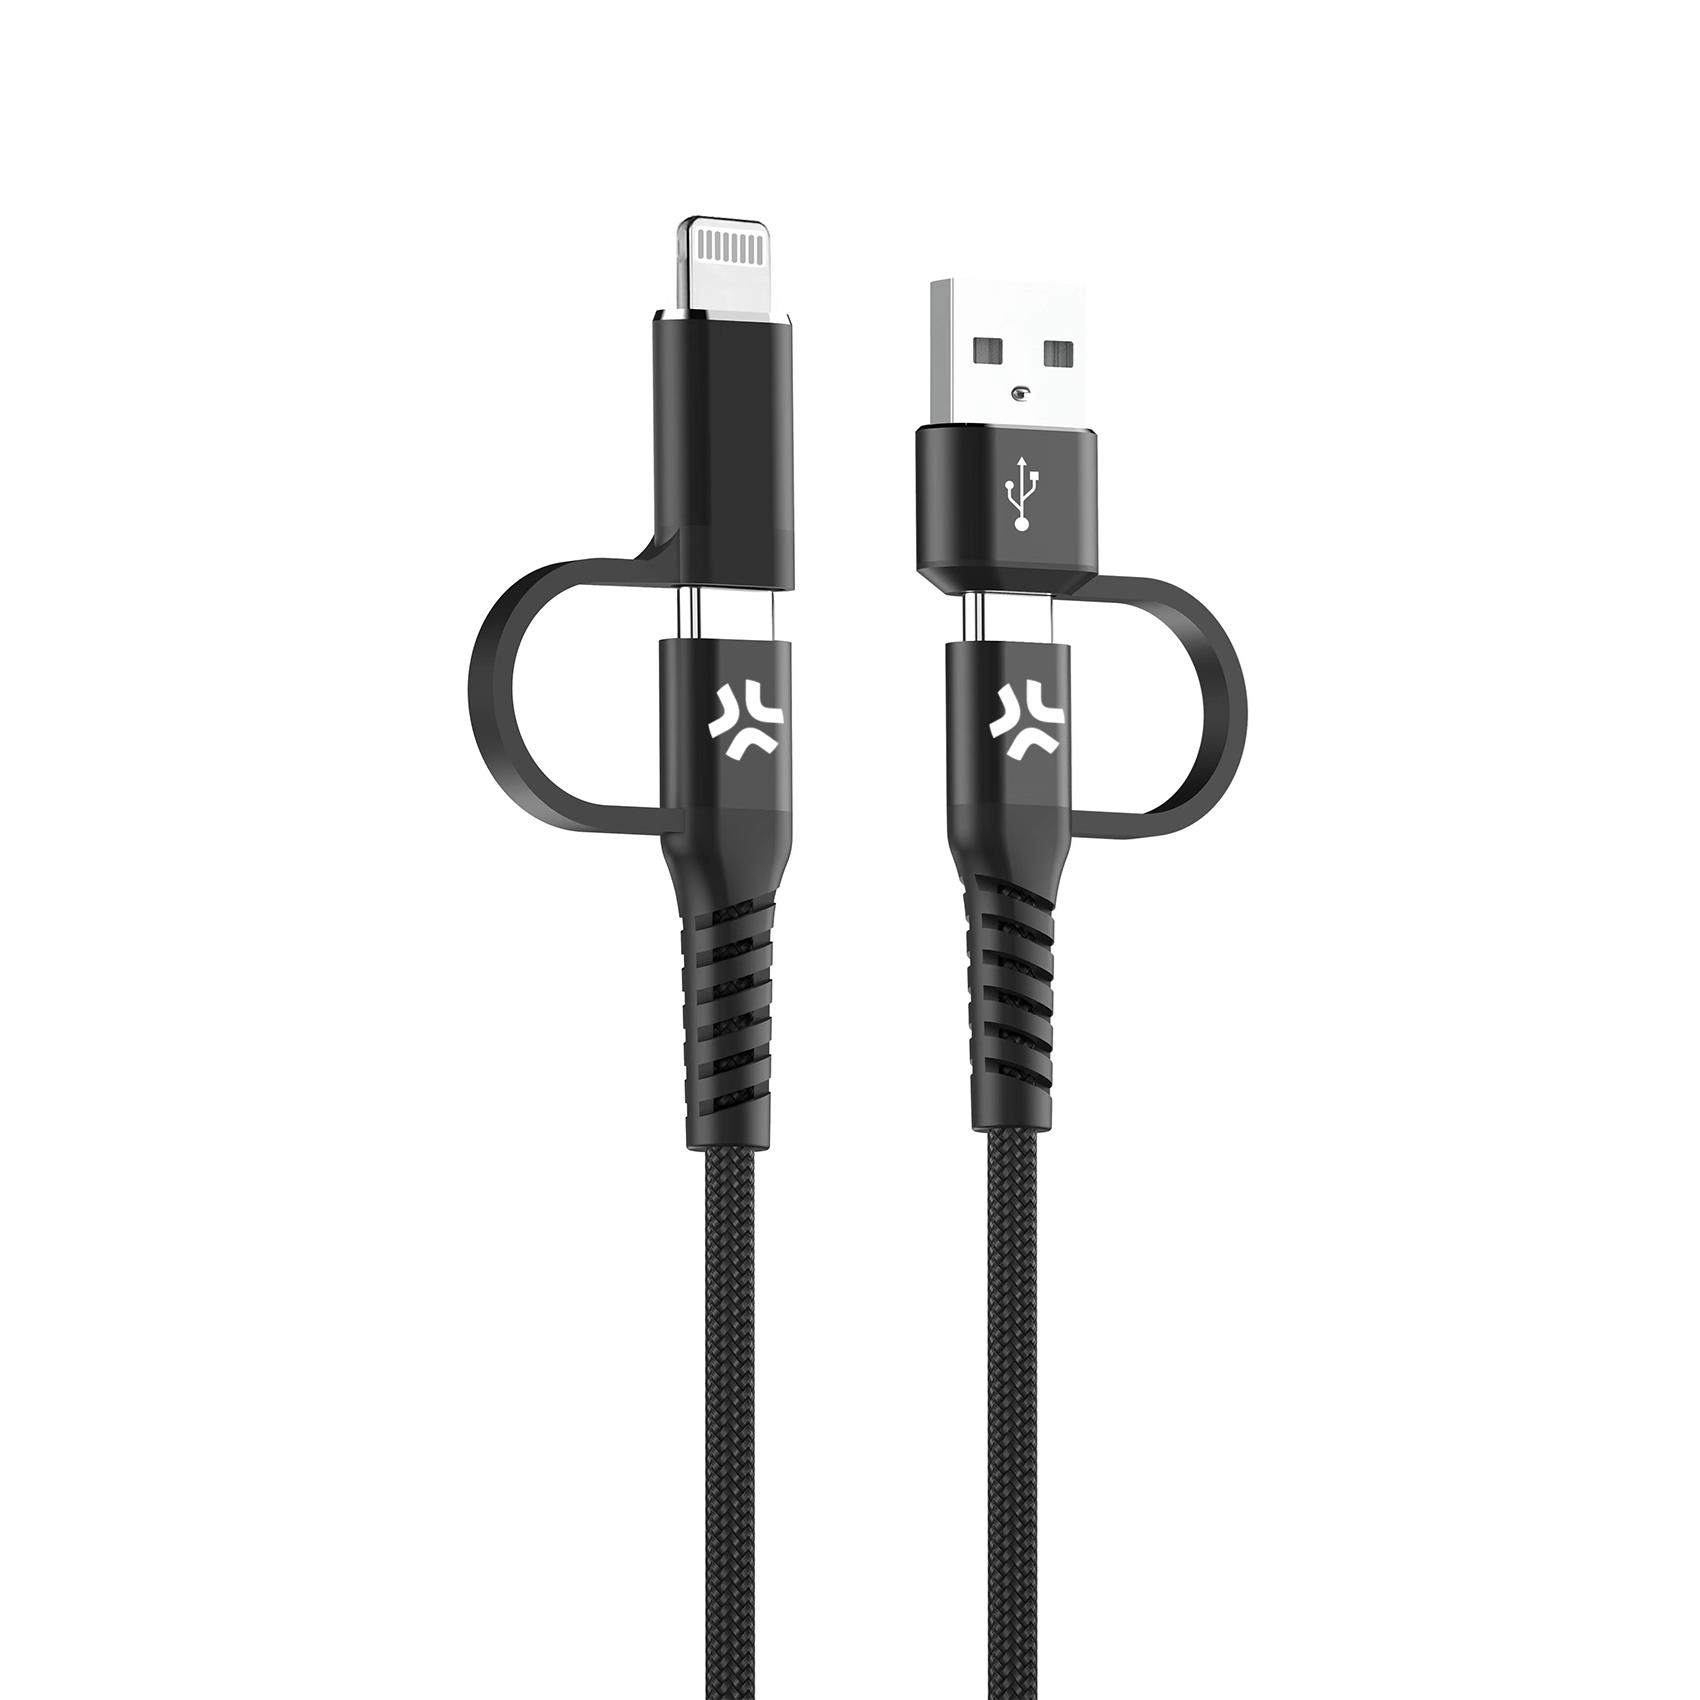 A+C TO C+LIGHT CABLE 2M BK